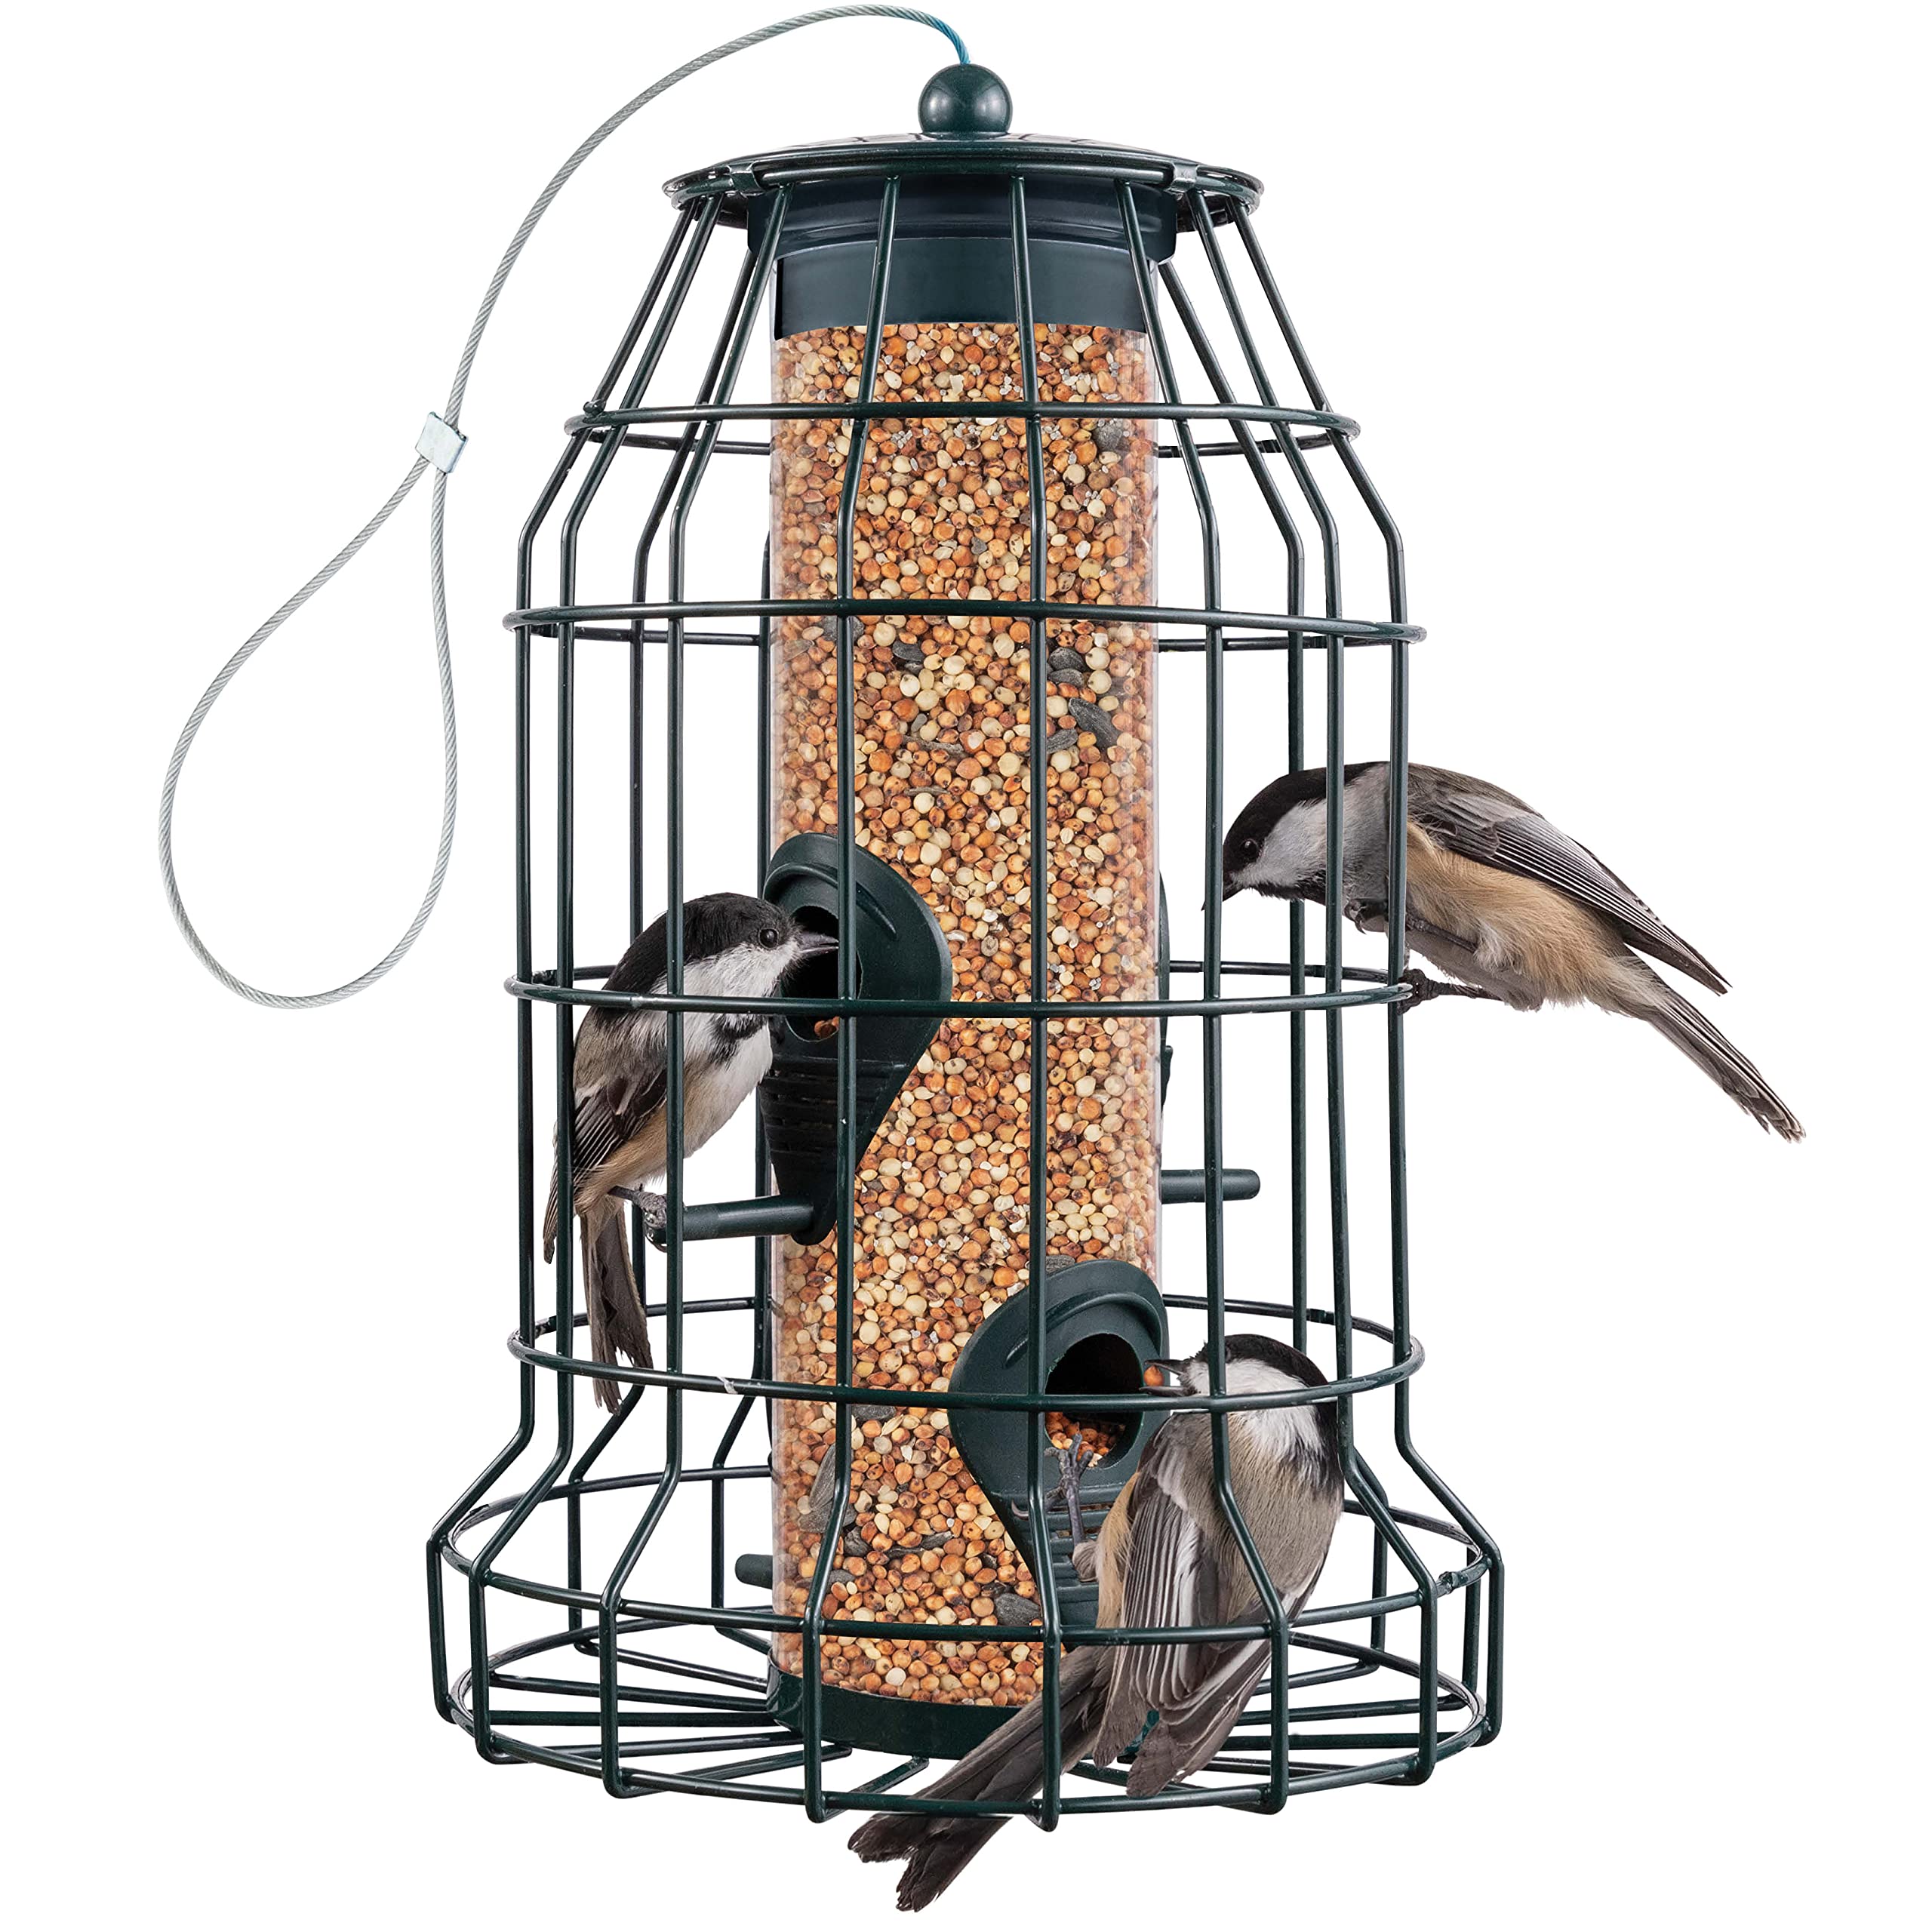 Squirrel Resistant Bird Feeders 22 oz. Bird Feeder with 4 Perches for Small Backyard Birds ONLY. Bird Feeder Squirrel Proof/Chew Proof/Rustproof. Fill with Wild Bird Seed for Outside Feeders  - Like New